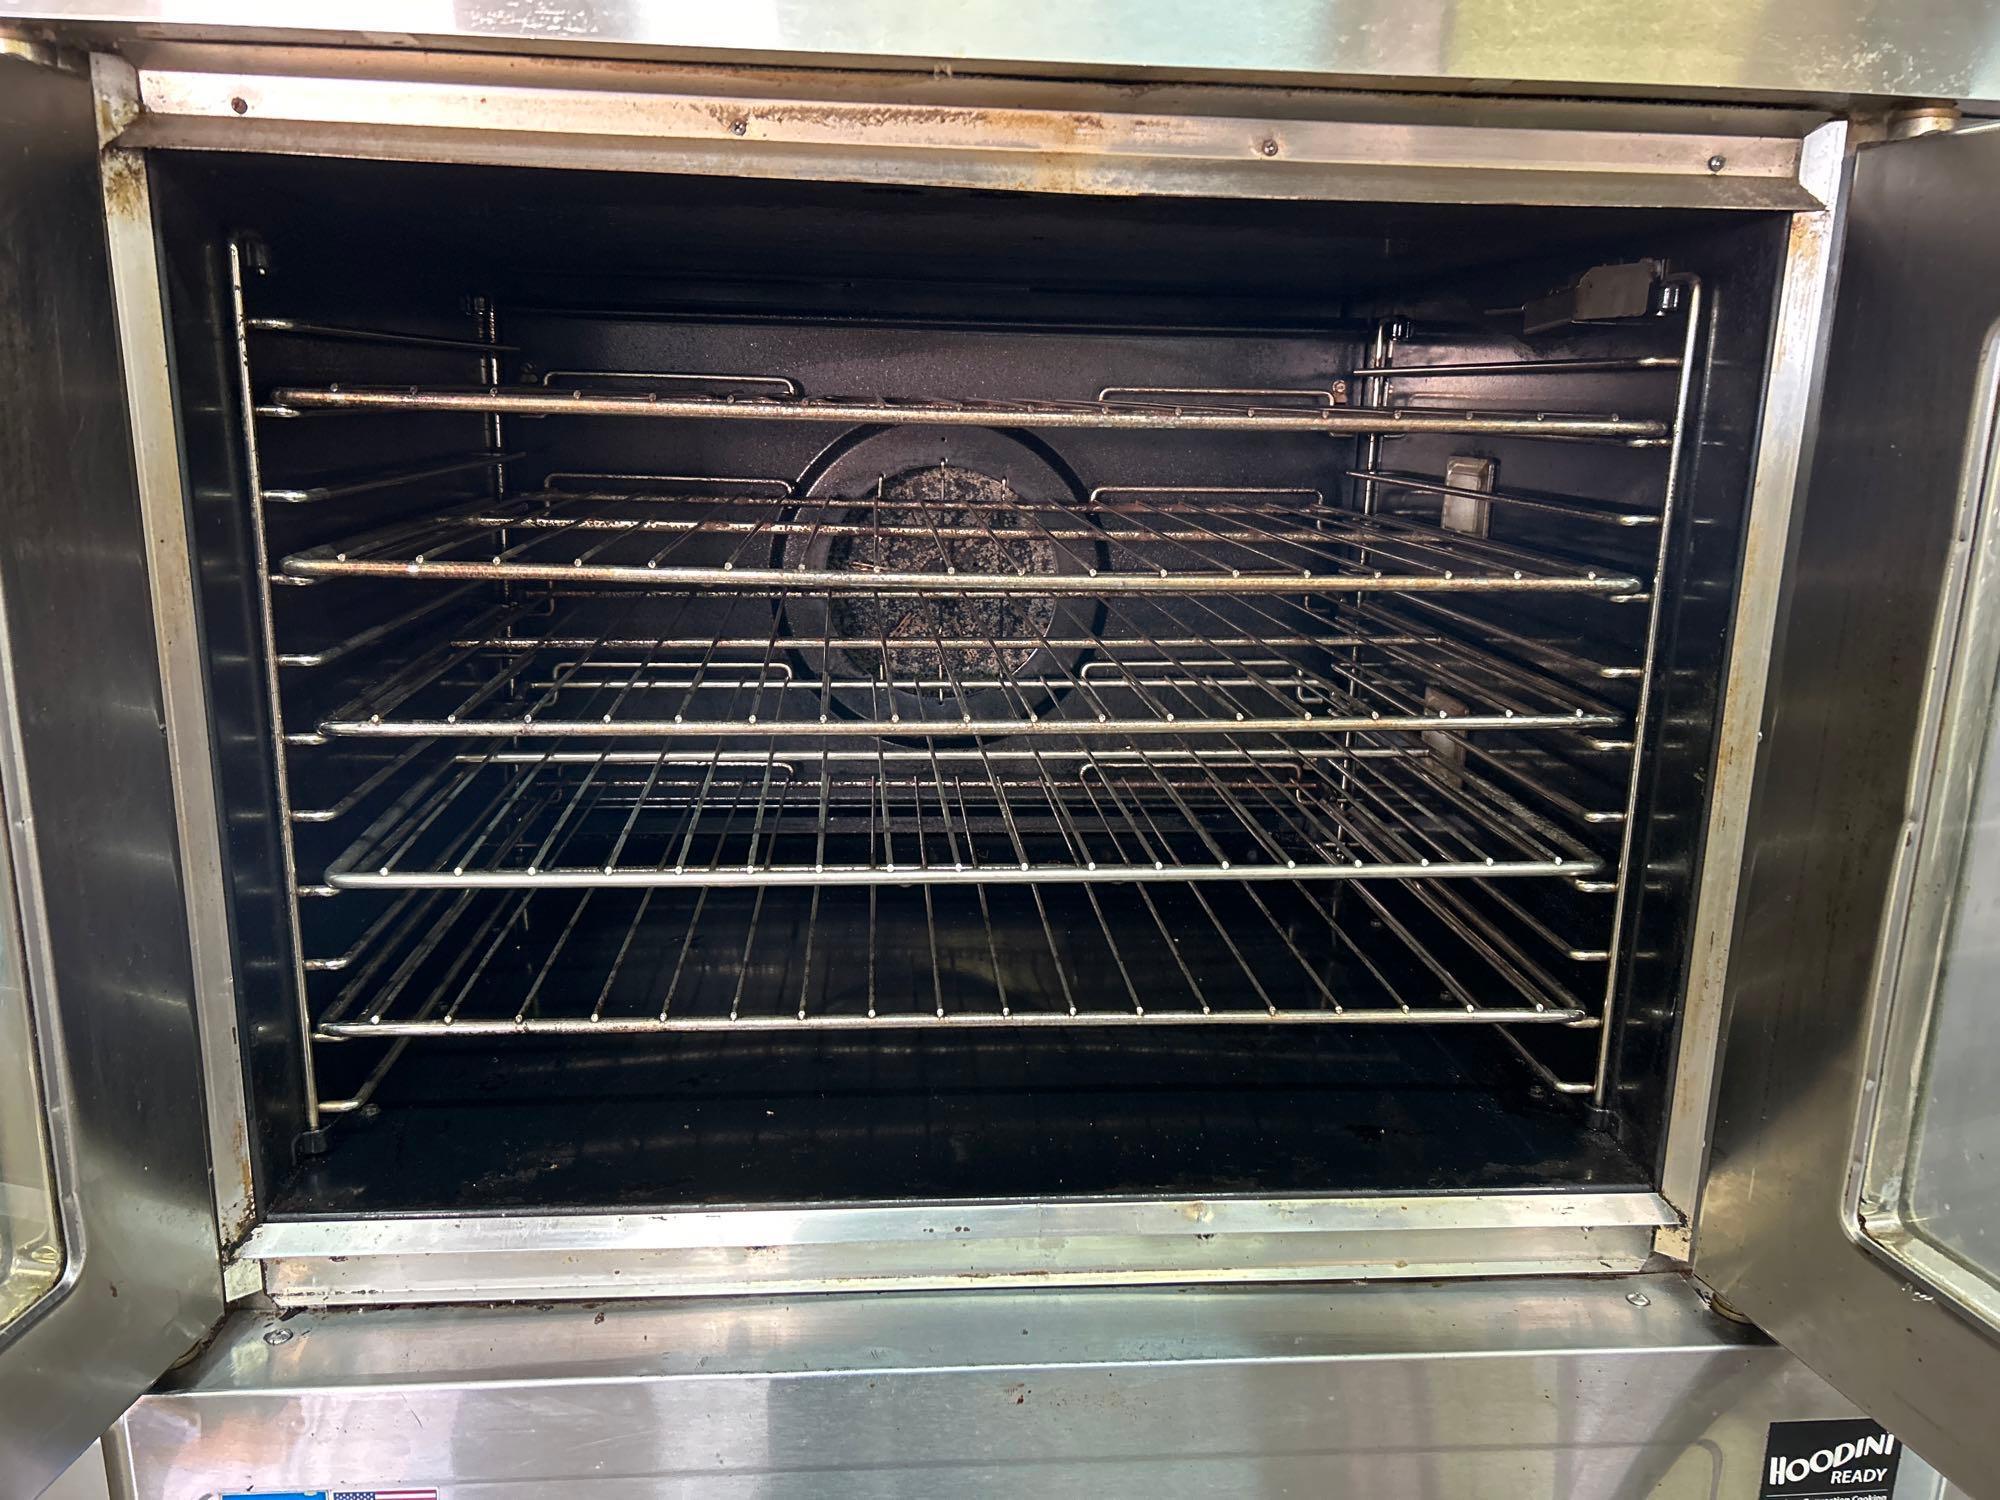 Blodgett Mdl. Zephaire 100 E Single Electric Convection Oven with Hoodini Hood